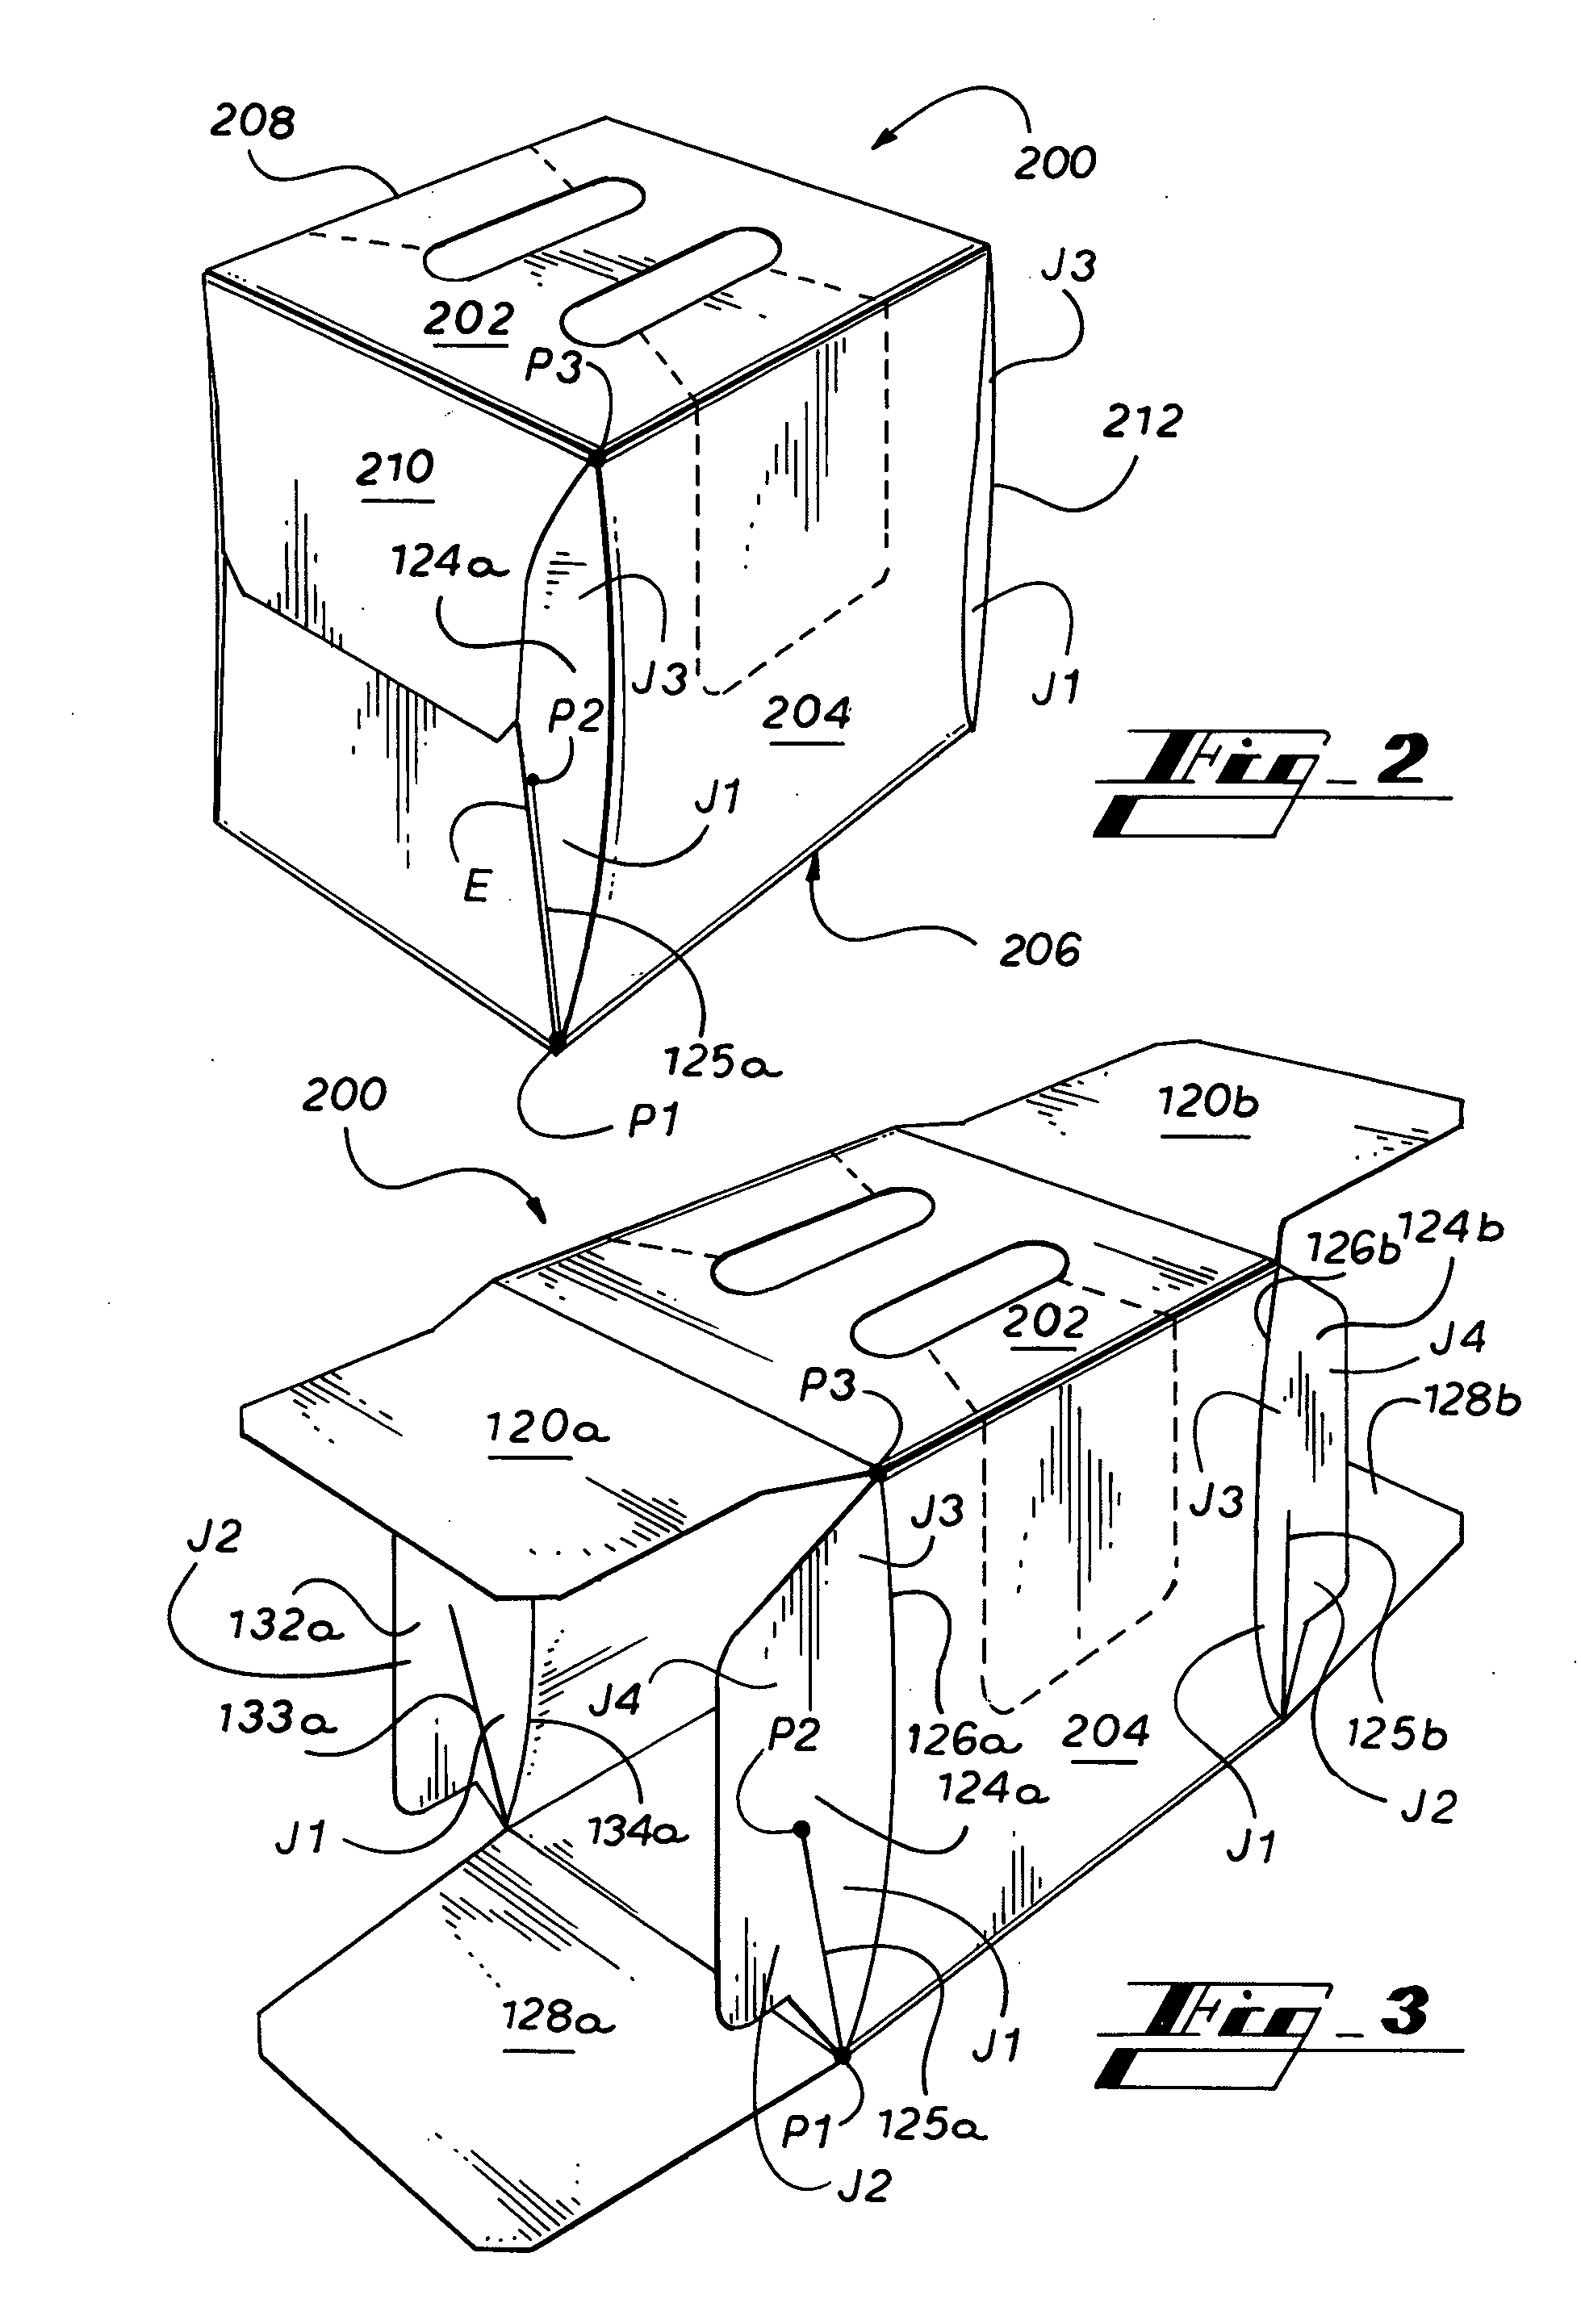 Carton for tapered and cylindrical articles